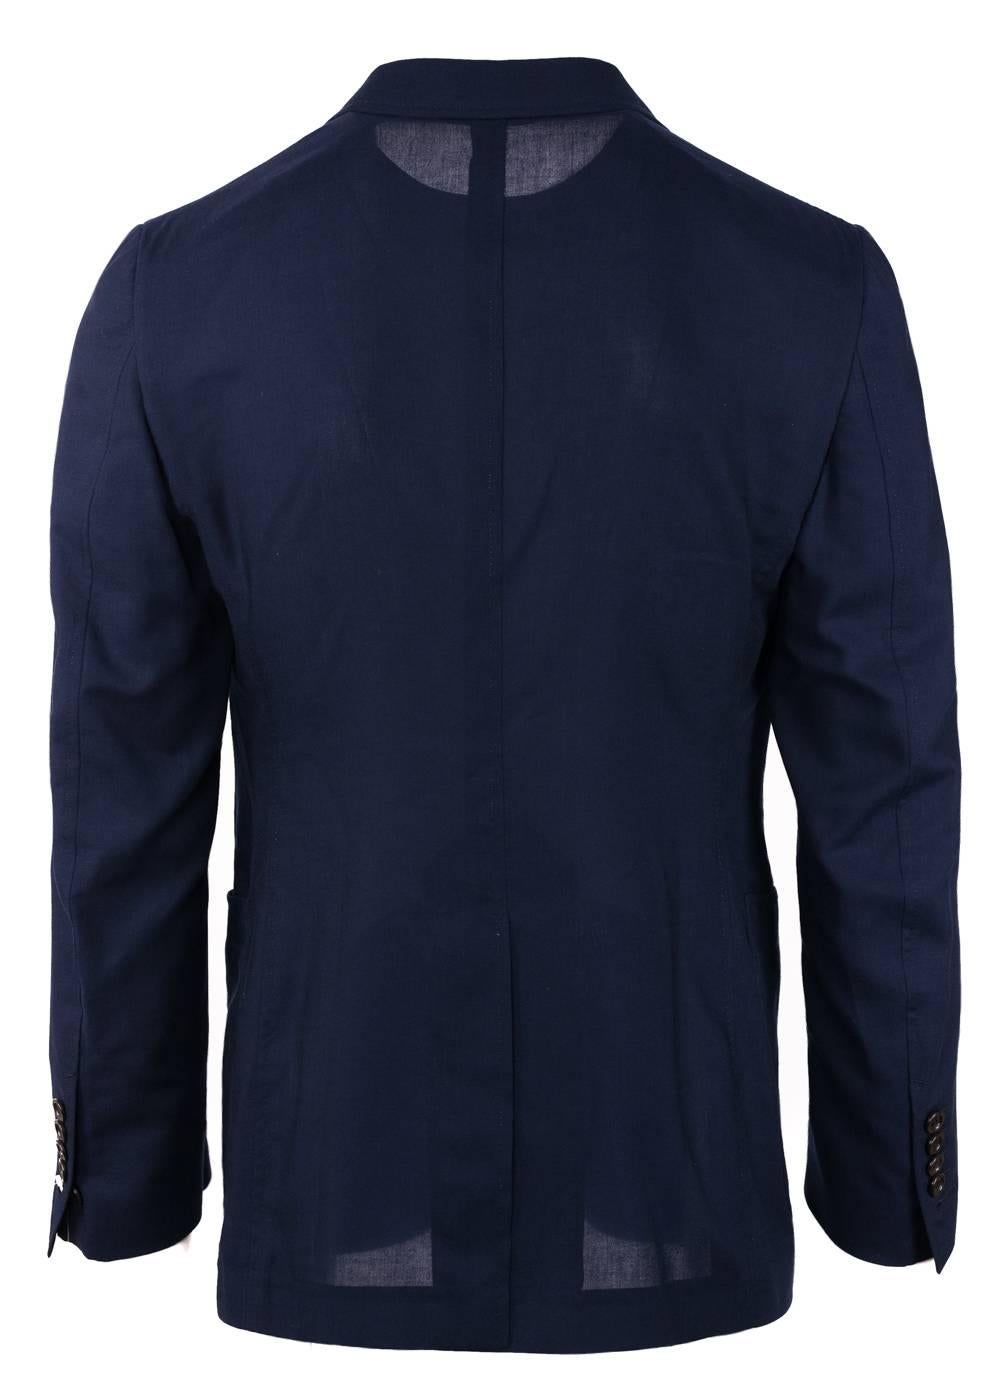 The signature Tom Ford Shelton Jacket updated in a luxurious cashmere base. This light constructed jacket is finished with notch lapels and patched pockets. This jacket is the perfect for the incoming spring/summer season with its lightweight